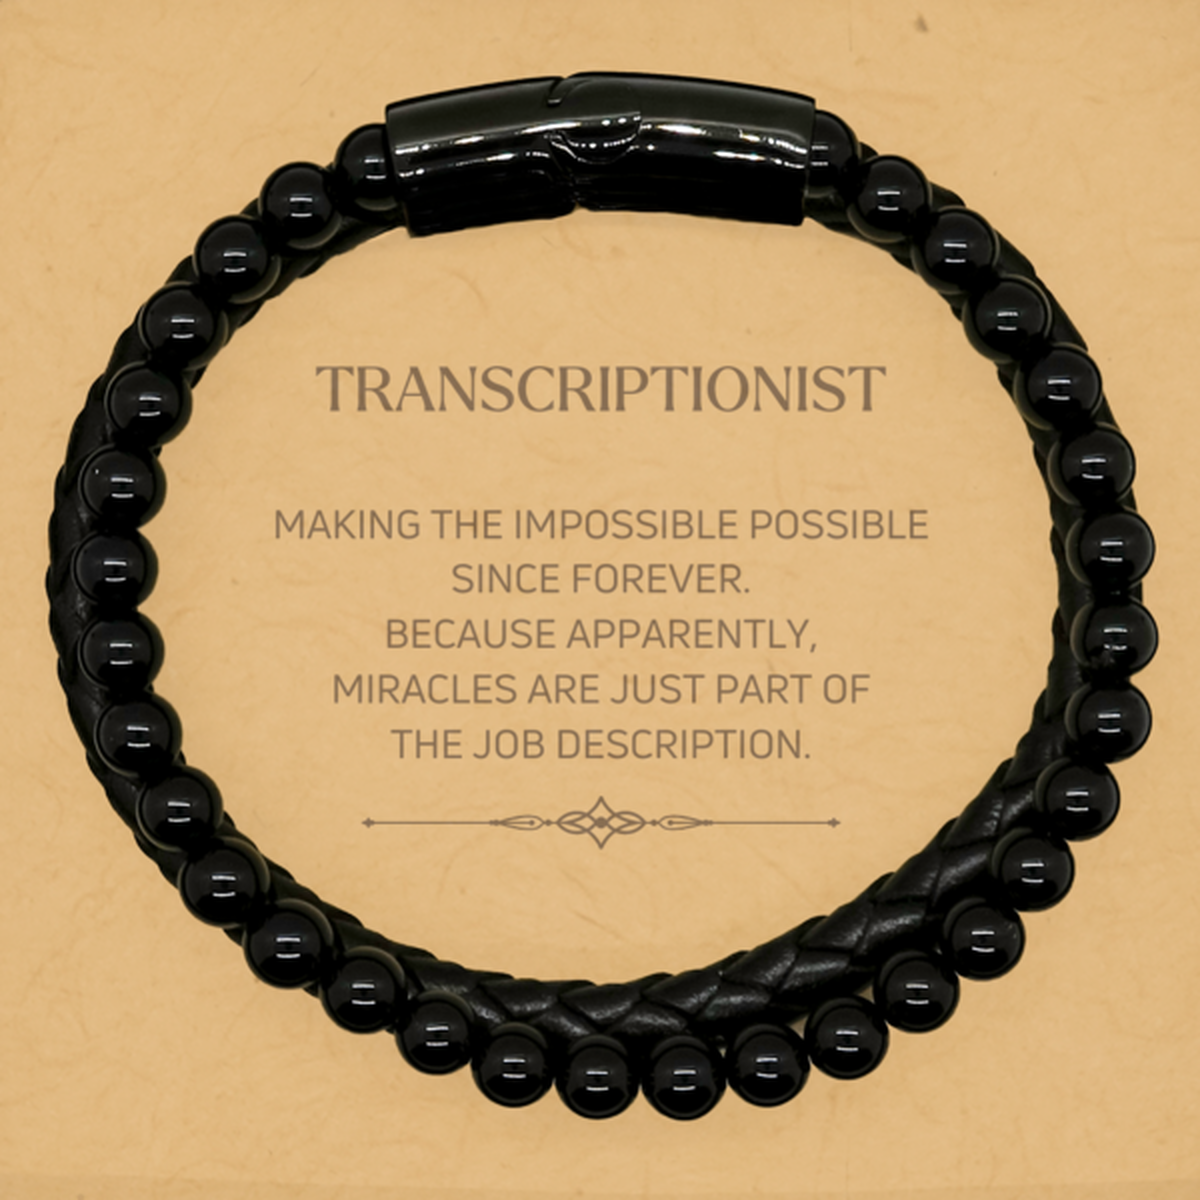 Funny Transcriptionist Gifts, Miracles are just part of the job description, Inspirational Birthday Stone Leather Bracelets For Transcriptionist, Men, Women, Coworkers, Friends, Boss